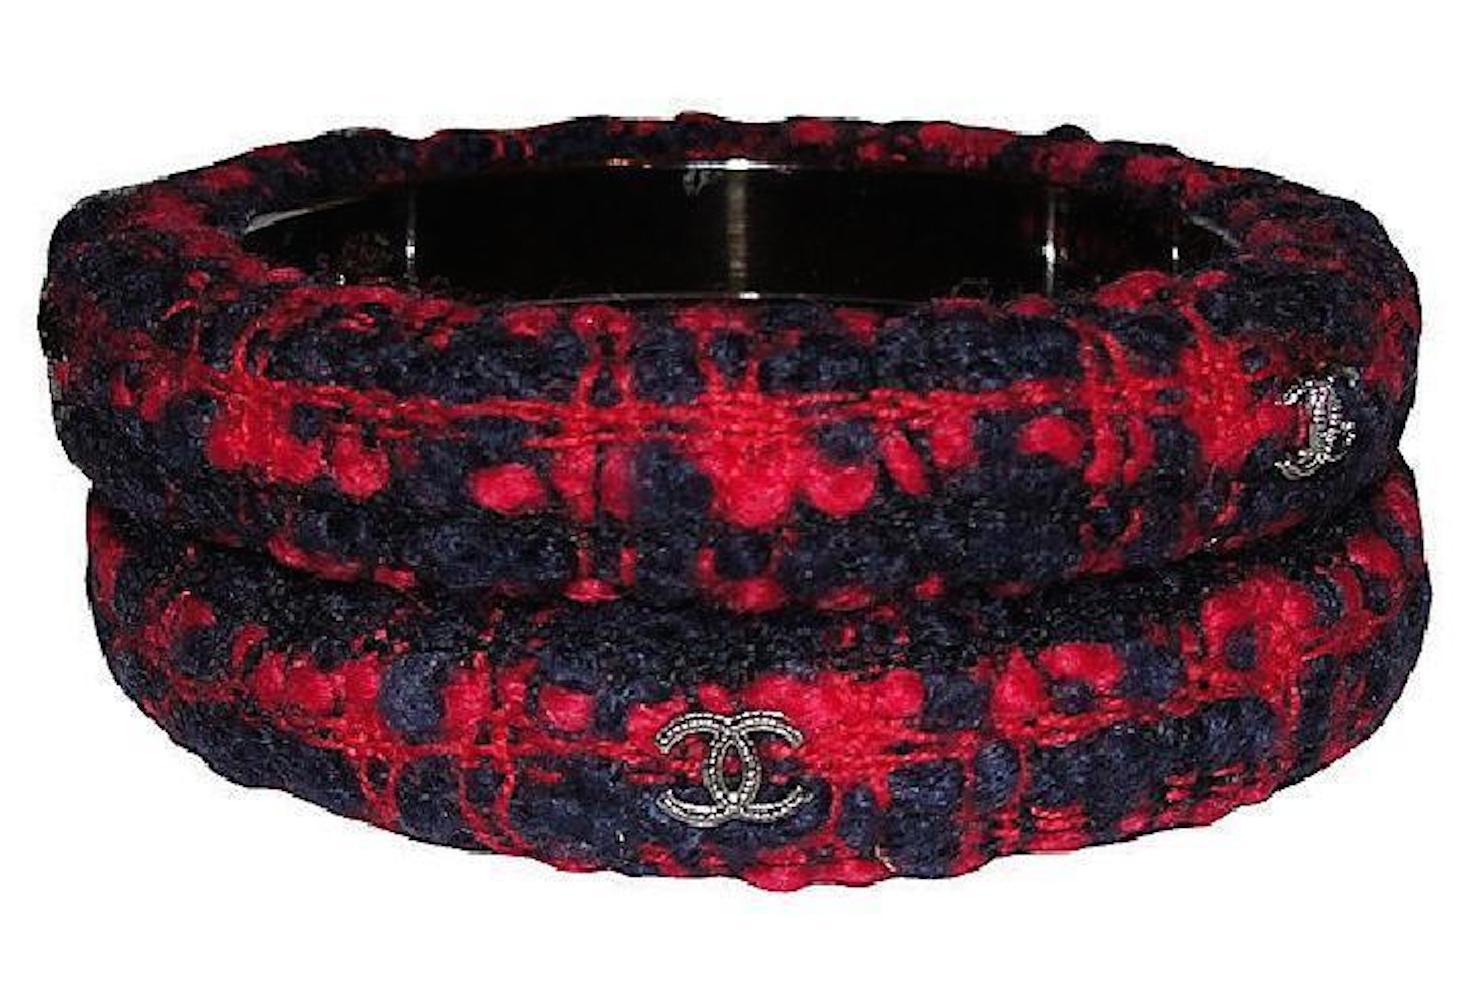 Set of two Chanel tweed wool bangles in red and black with steel interior from 2009. Marked: S (small), Chanel, P (spring), CC, Made in Italy. Dimensions: 2.5